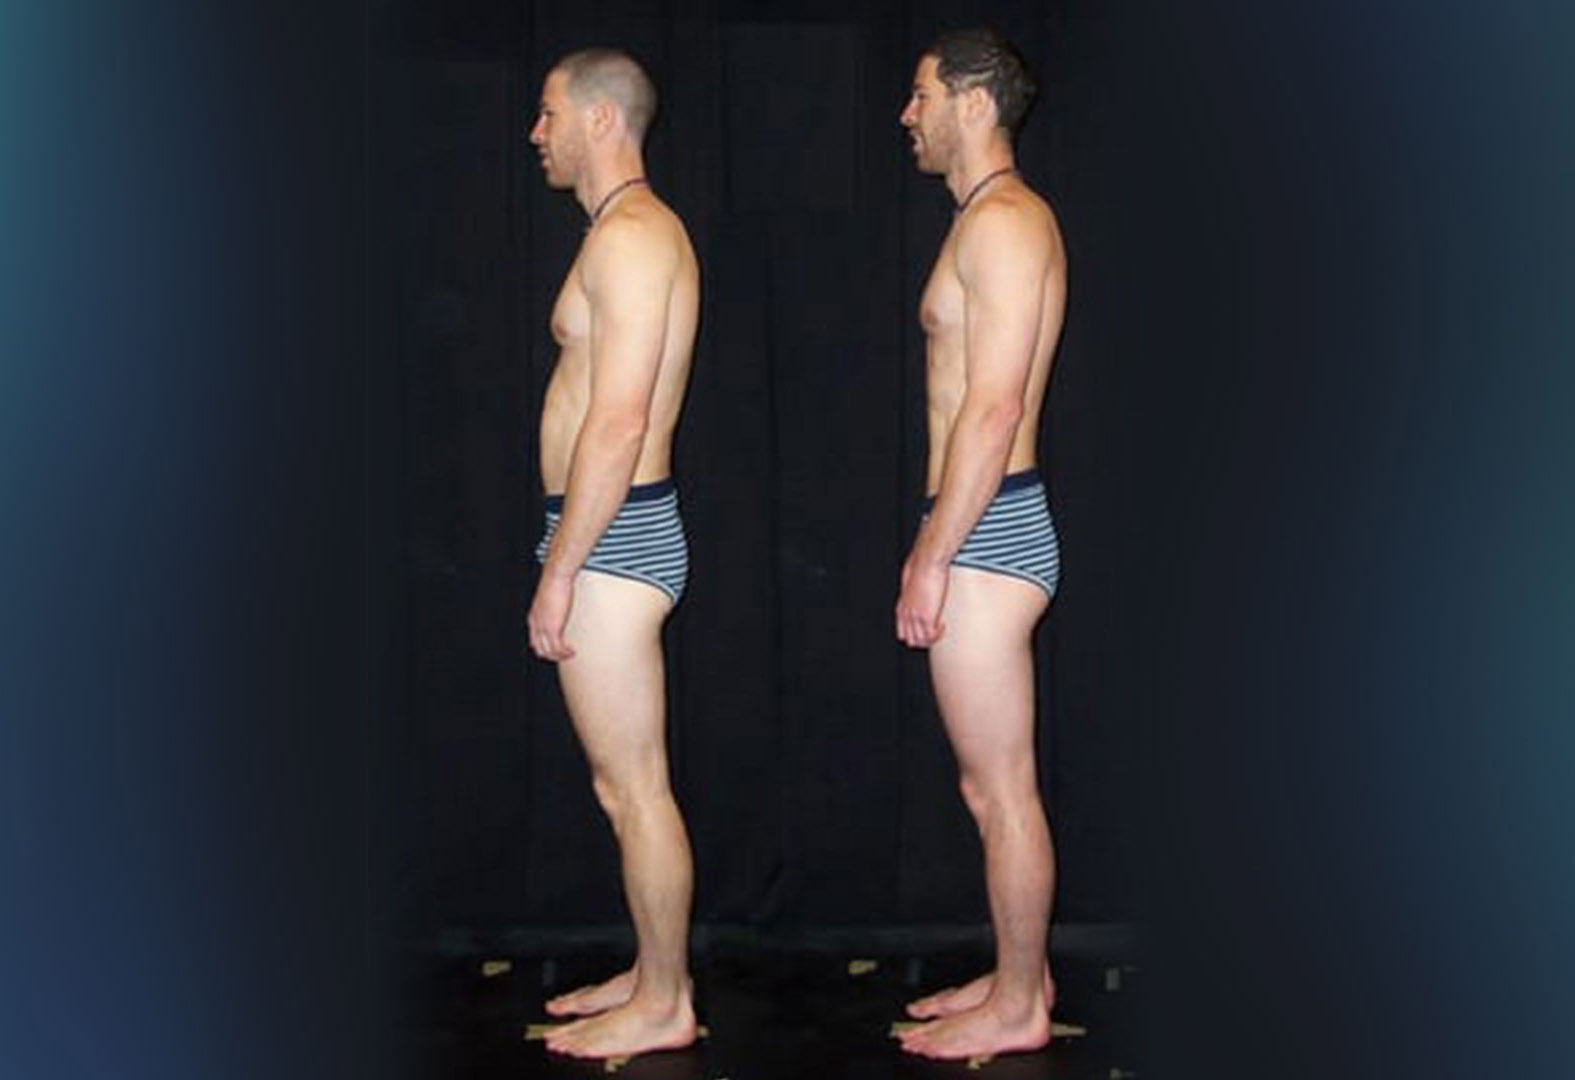 Before and after ten sessions using the Rolfing structural integration technique